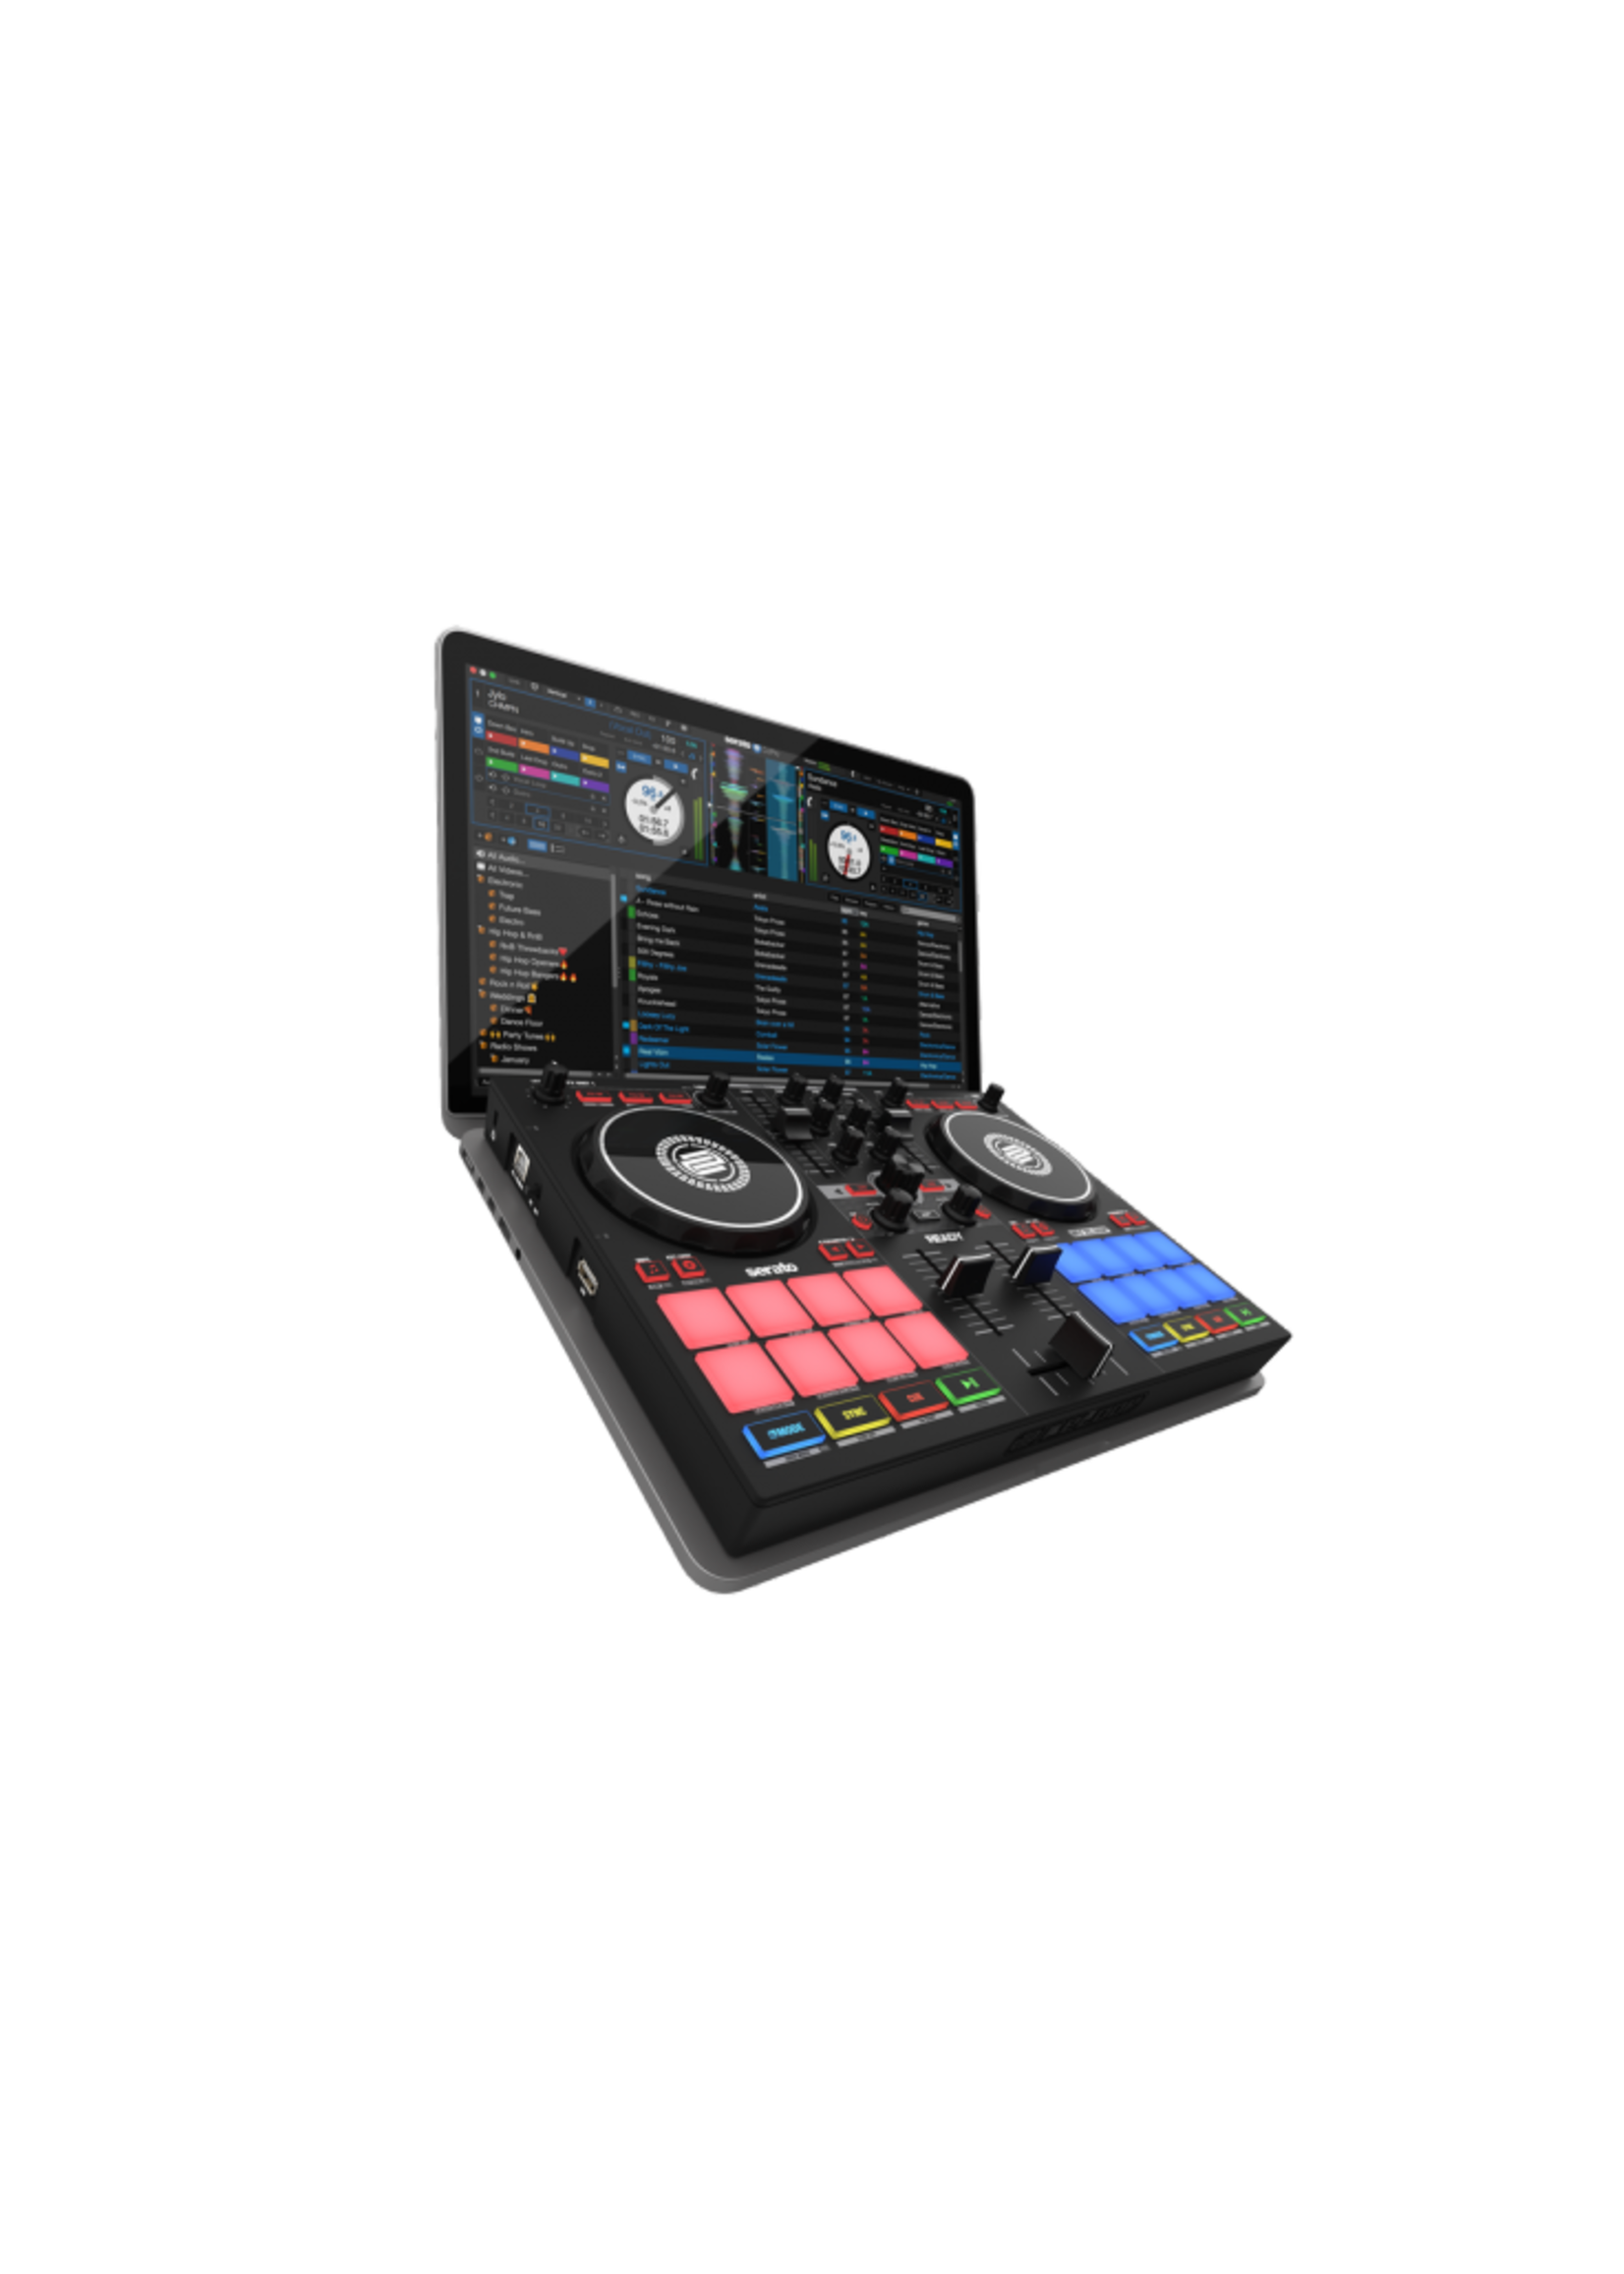 Reloop Reloop Ready Portable Performance DJ Controller for Serato